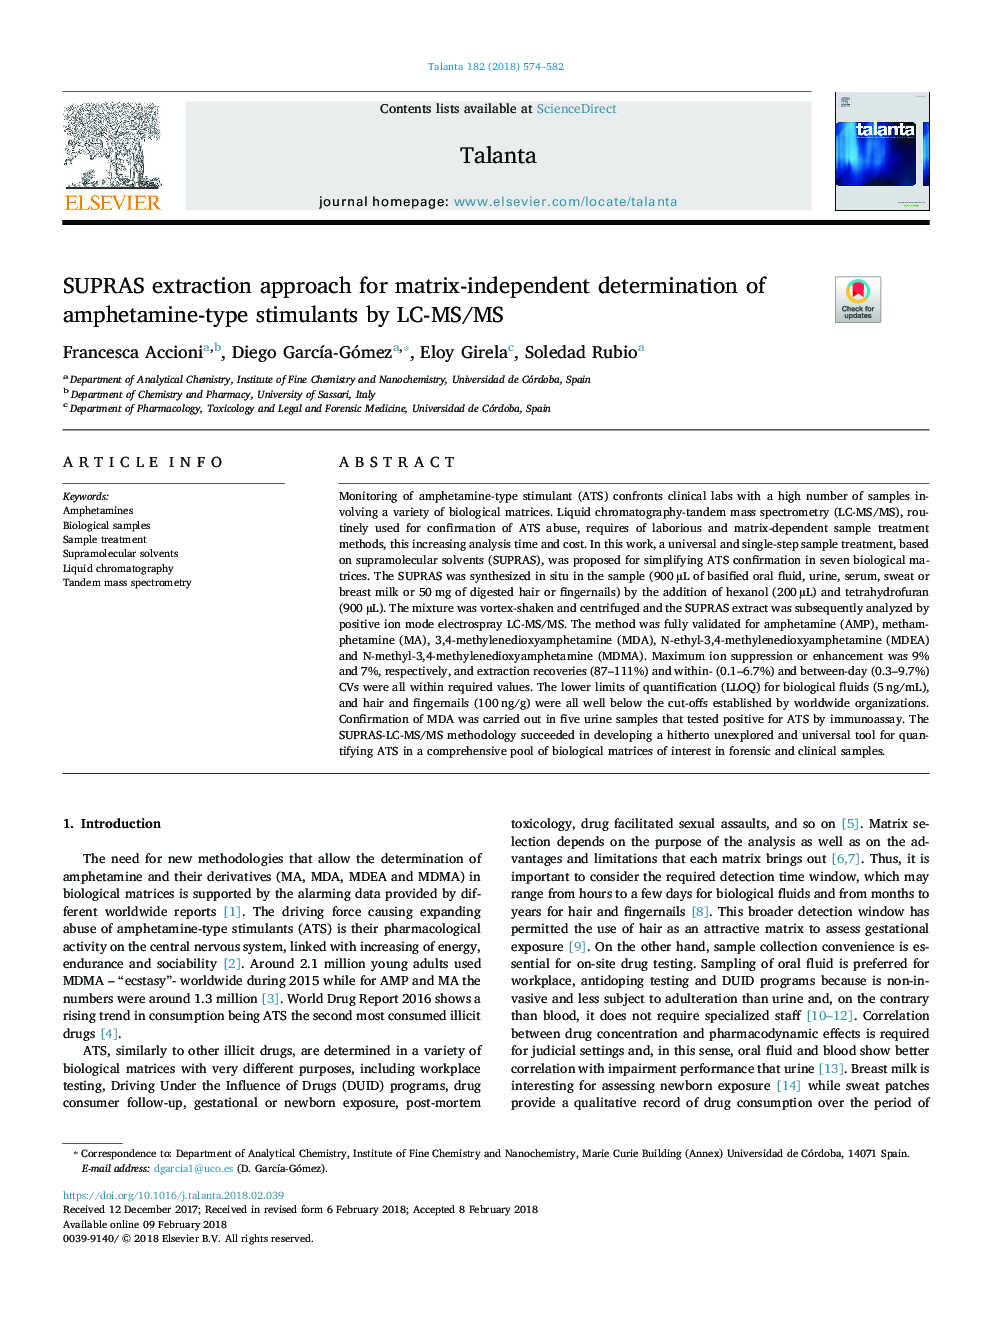 SUPRAS extraction approach for matrix-independent determination of amphetamine-type stimulants by LC-MS/MS